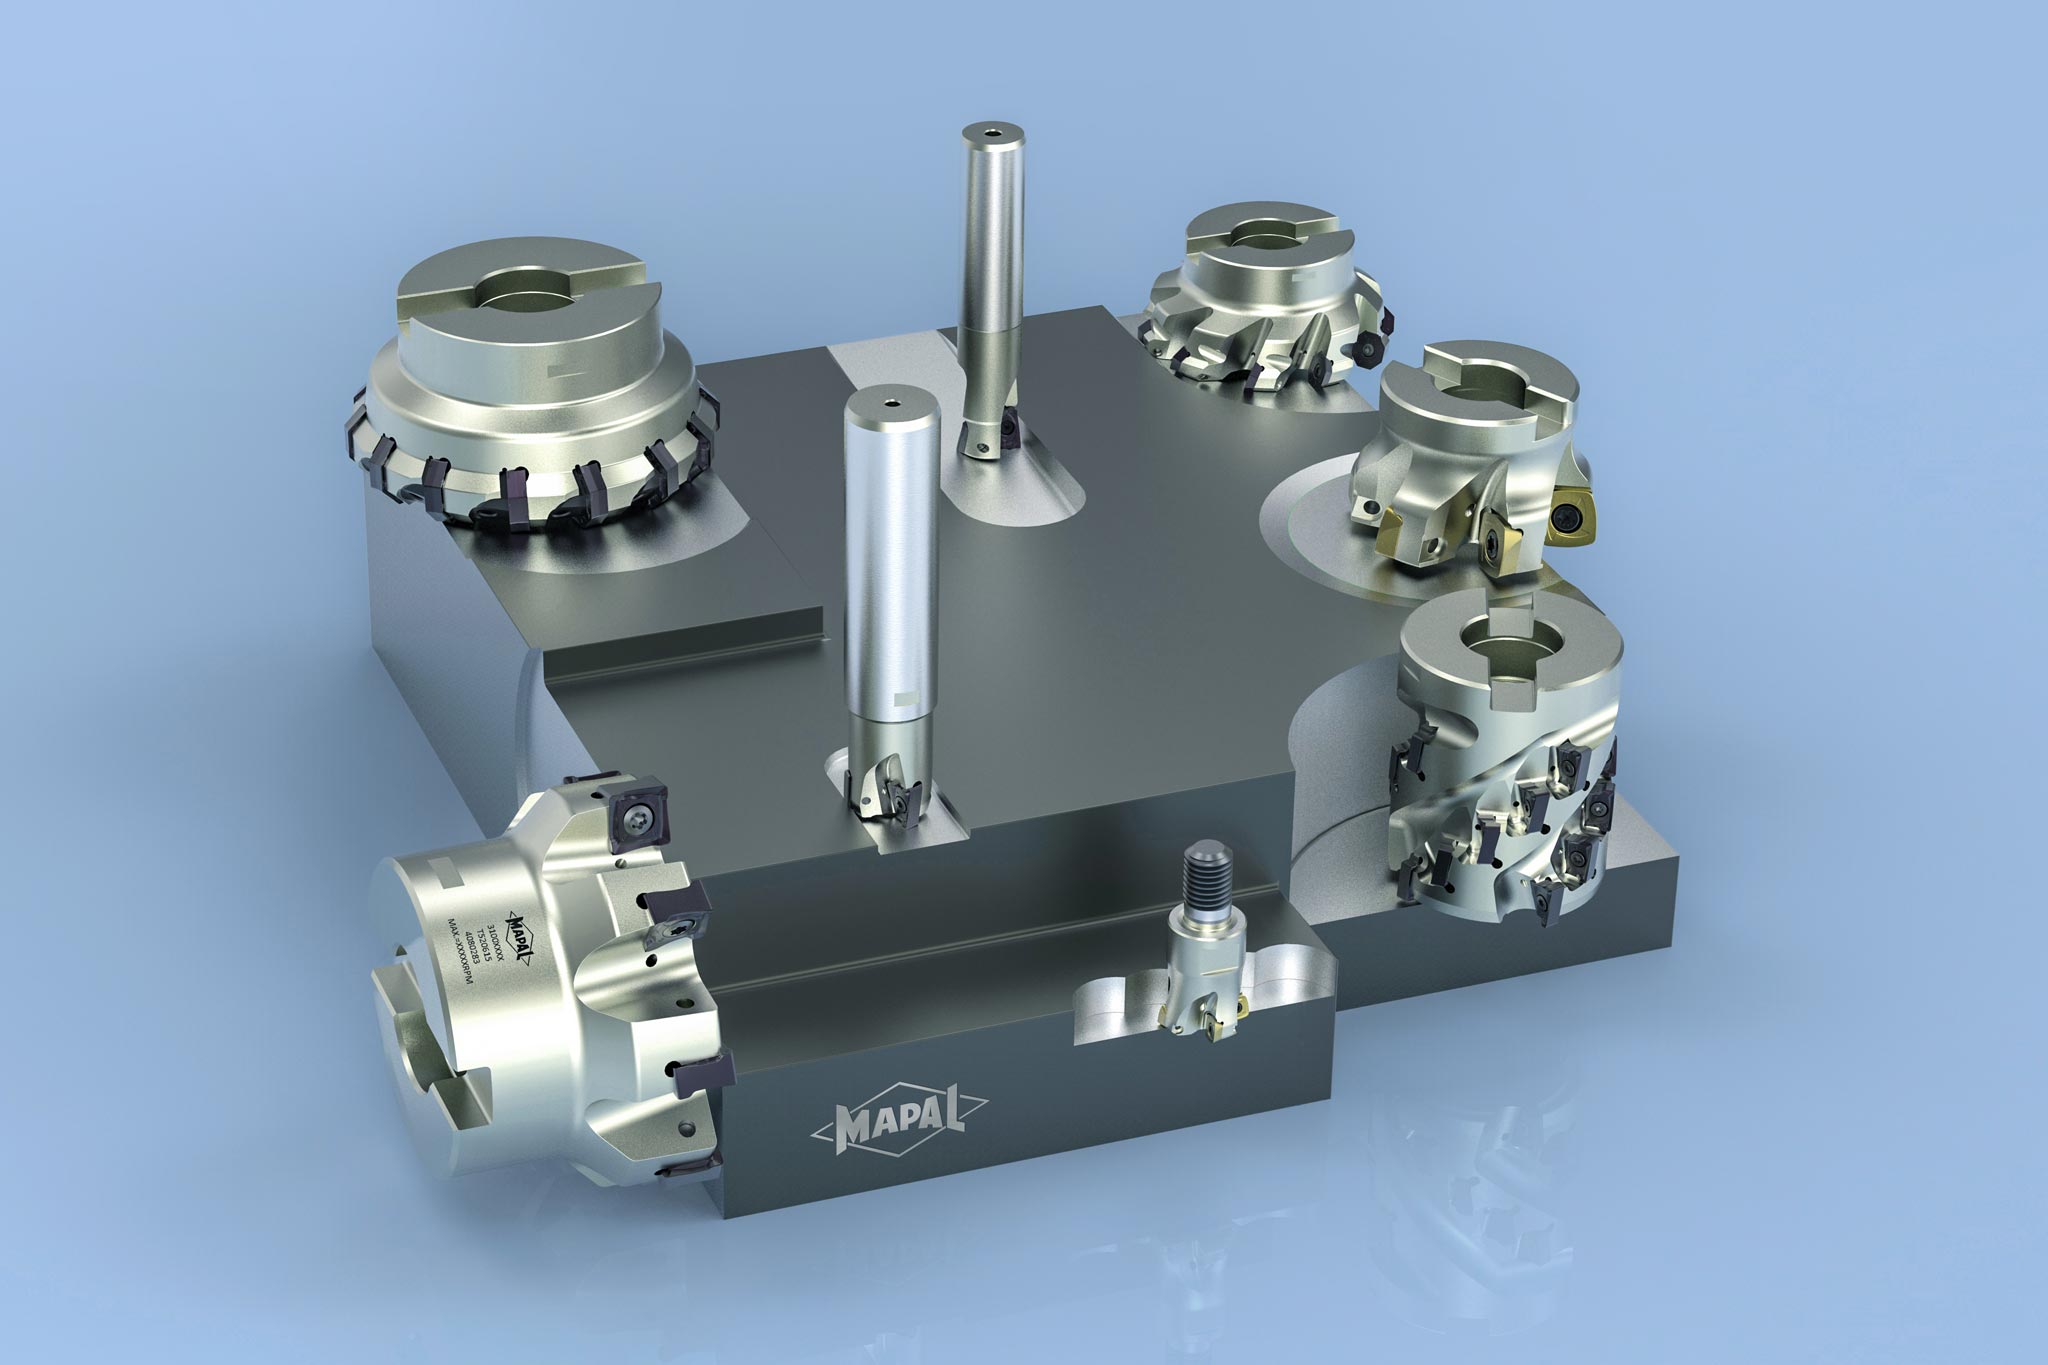 The picture shows a programme overview of NeoMill milling cutters for different applications.